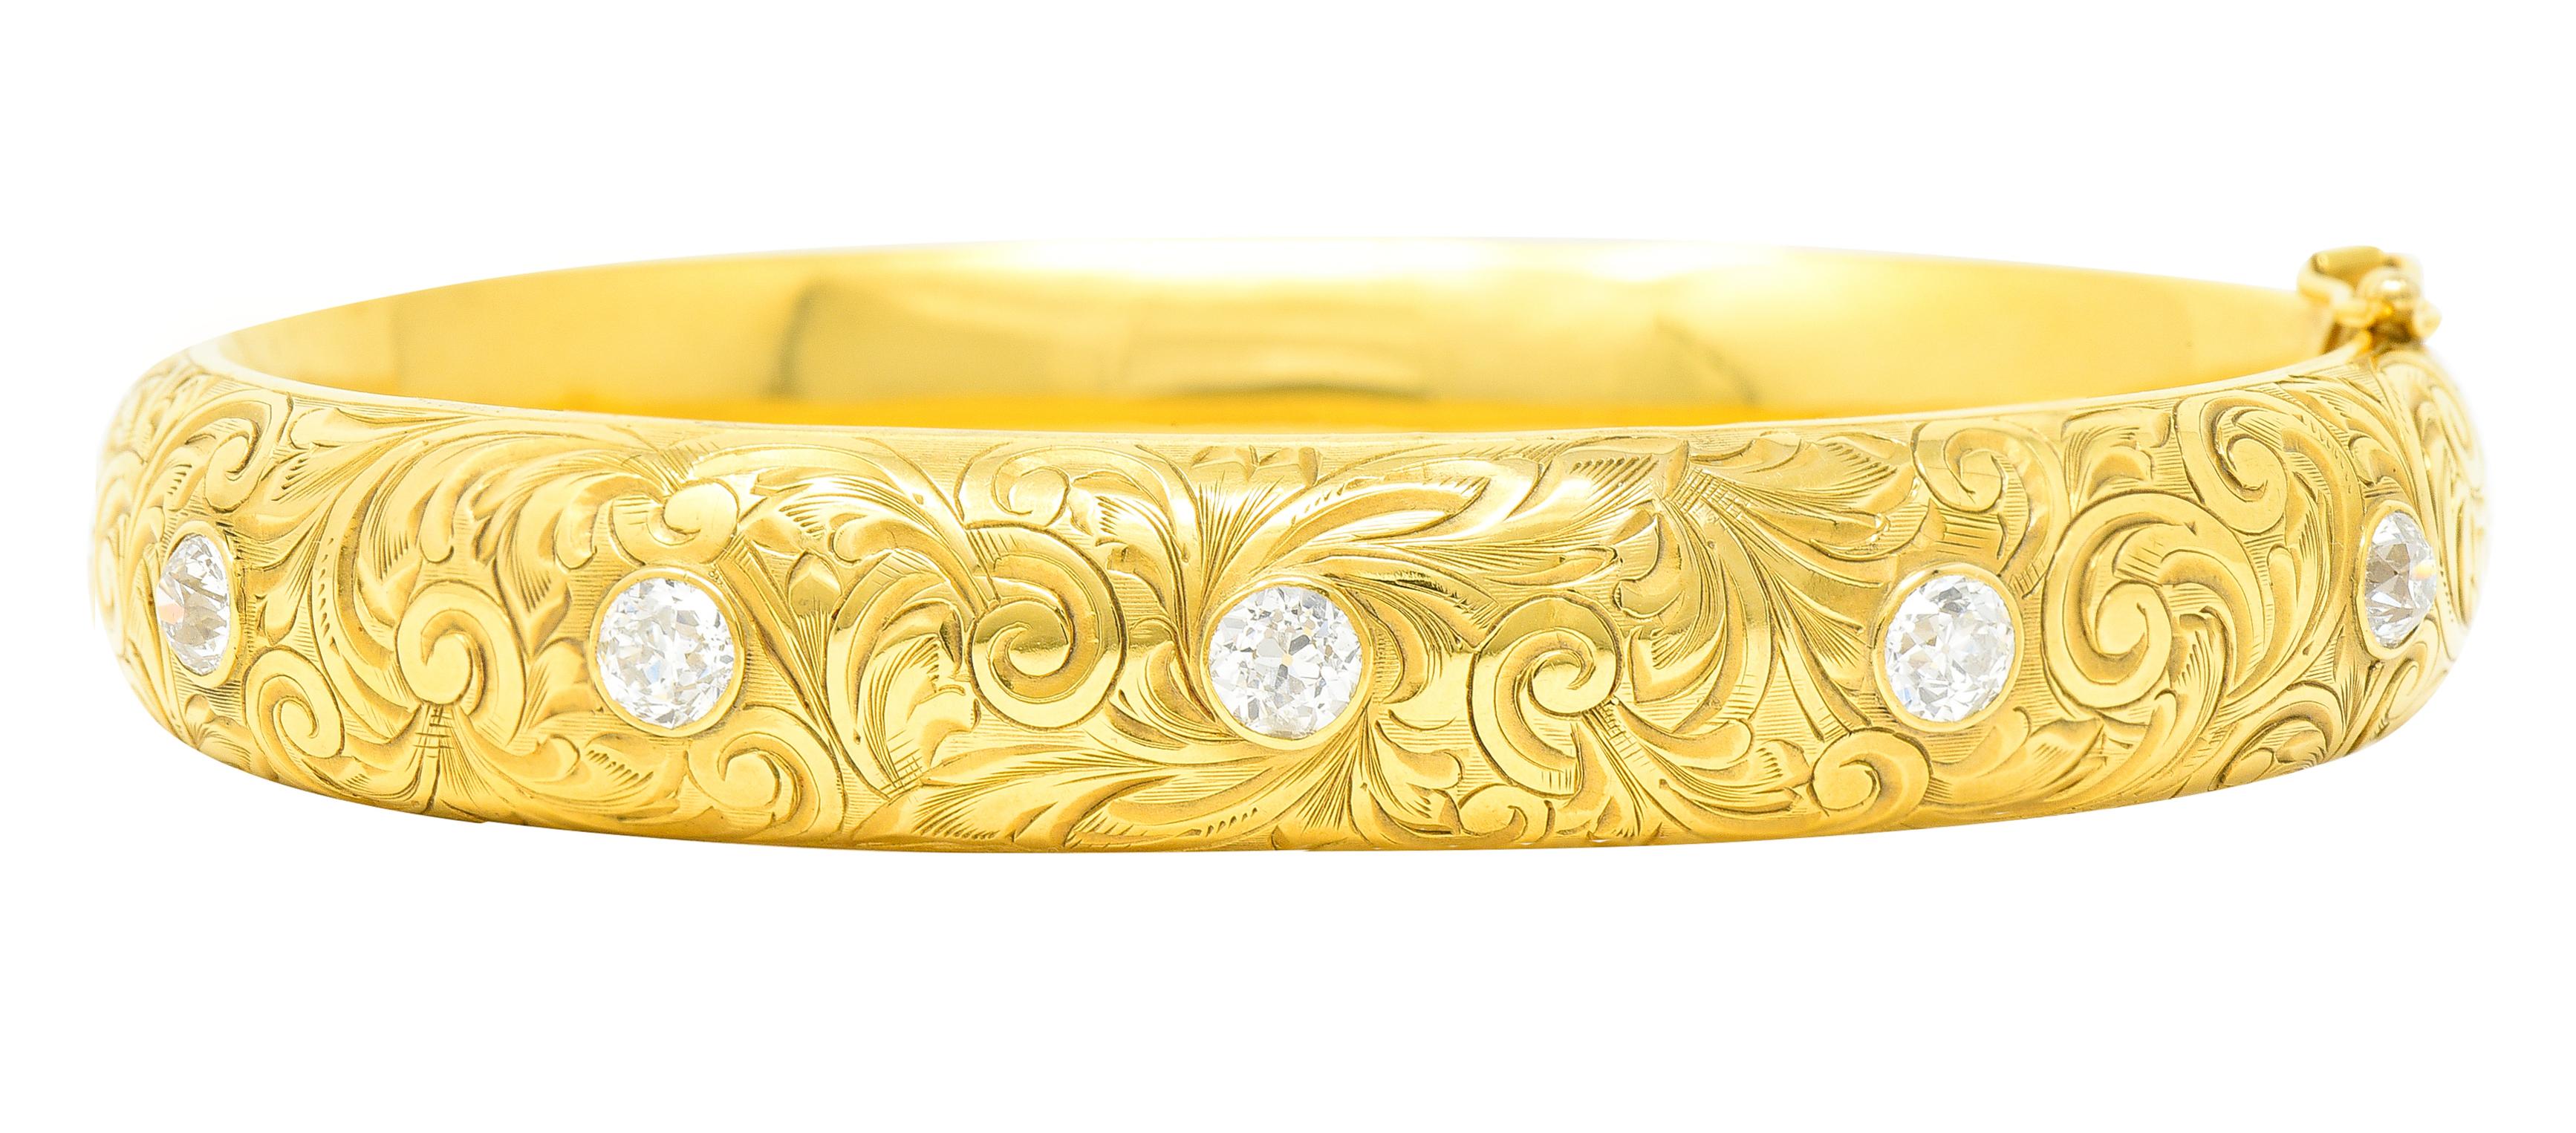 Hinged bangle bracelet is deeply engraved fully around by flourishing foliate. And bezel set to front by five old mine cut diamonds. Weighing collectively approximately 1.45 carats - G/H color with SI1 to VS2 clarity. Completed by a figure eight